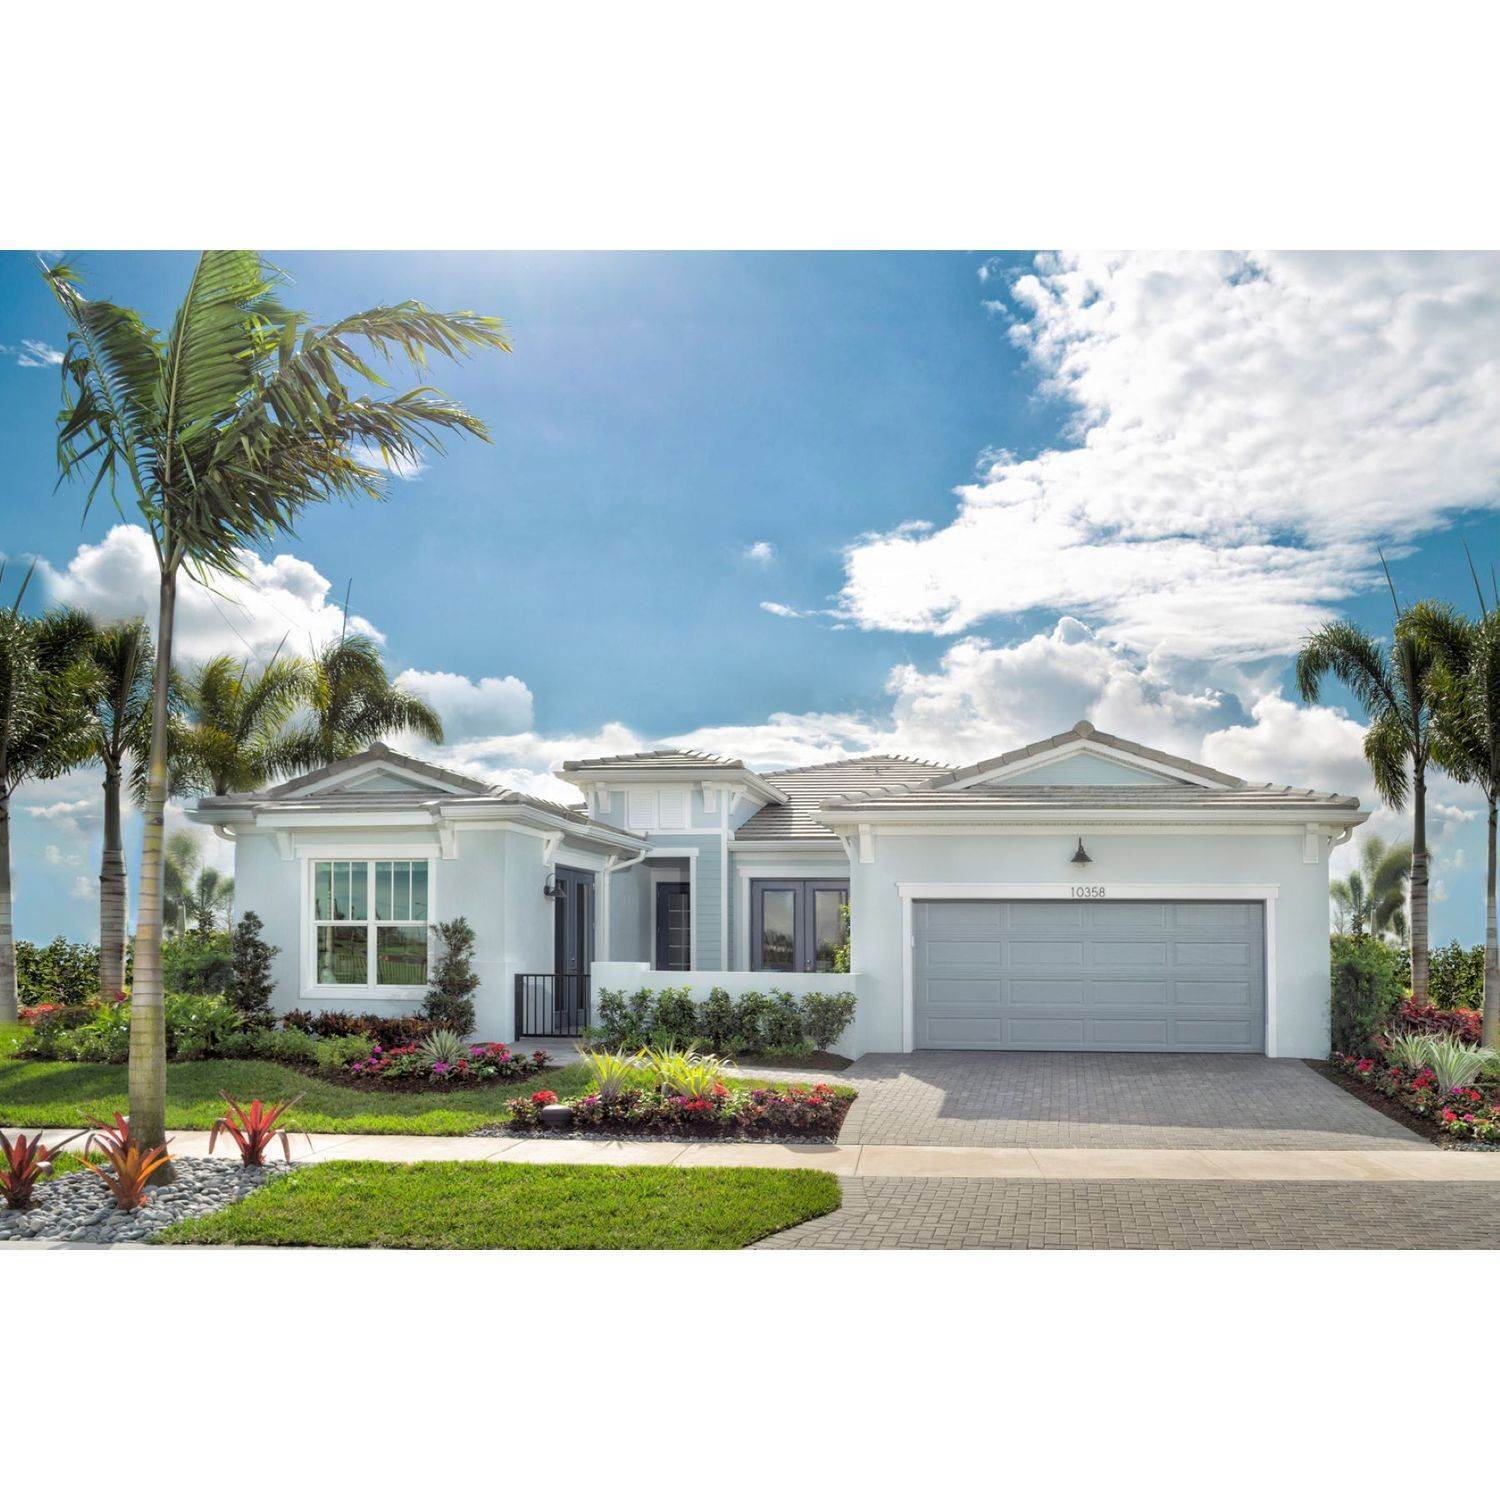 8. Tradition - Telaro xây dựng tại 11824 SW Antarus Ct, Port St. Lucie, FL 34987